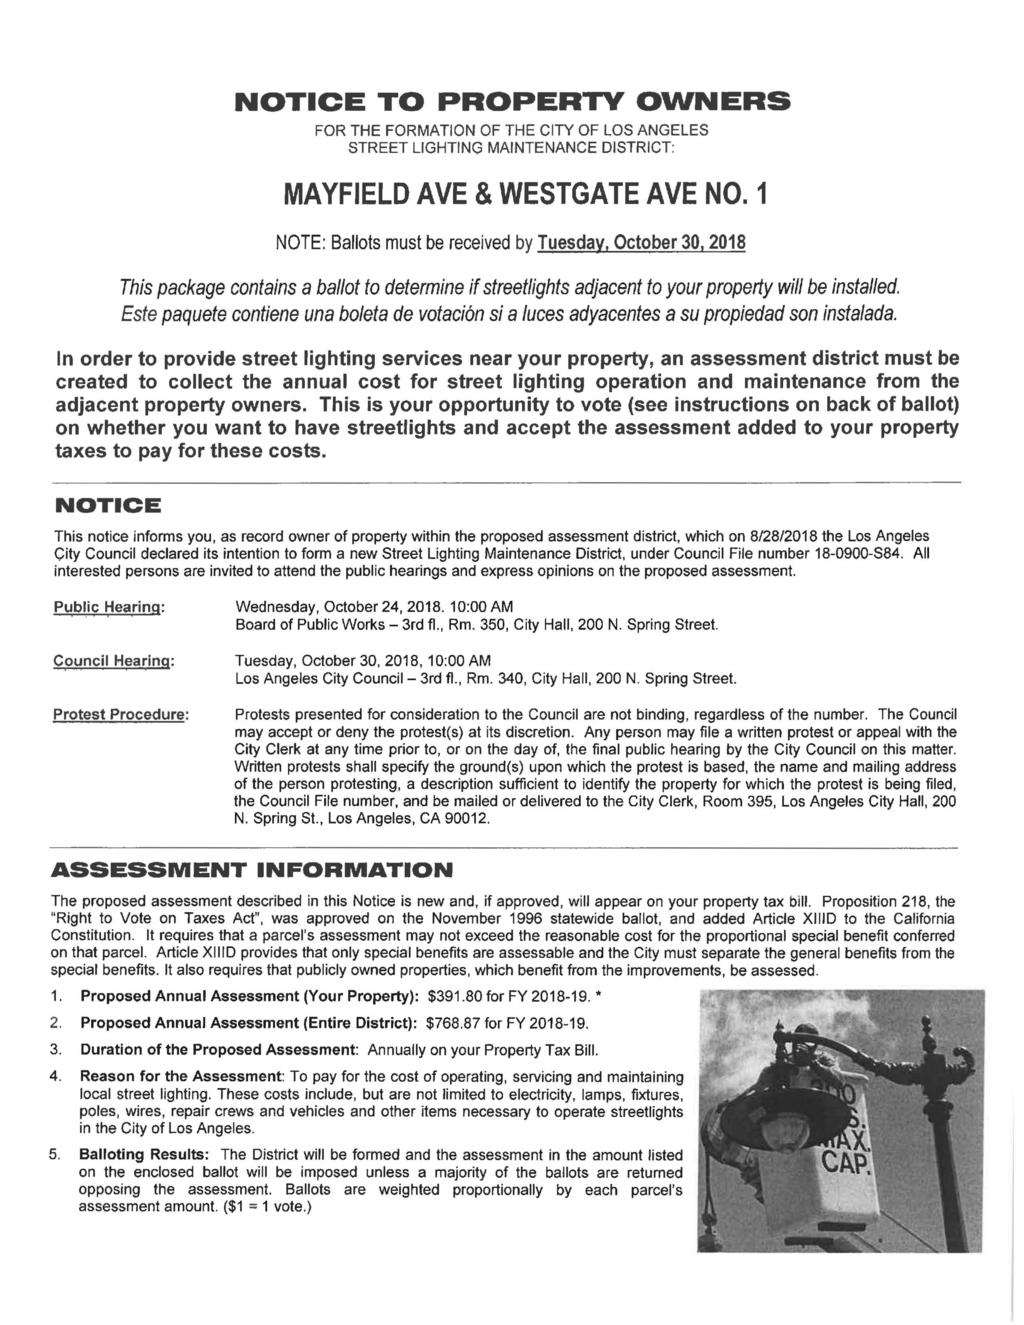 NOTICE TO PROPERTY OWNERS FOR THE FORMATION OF THE CITY OF LOS ANGELES STREET LIGHTING MAINTENANCE DISTRICT: MAYFIELD AVE & WESTGATE AVE NO.